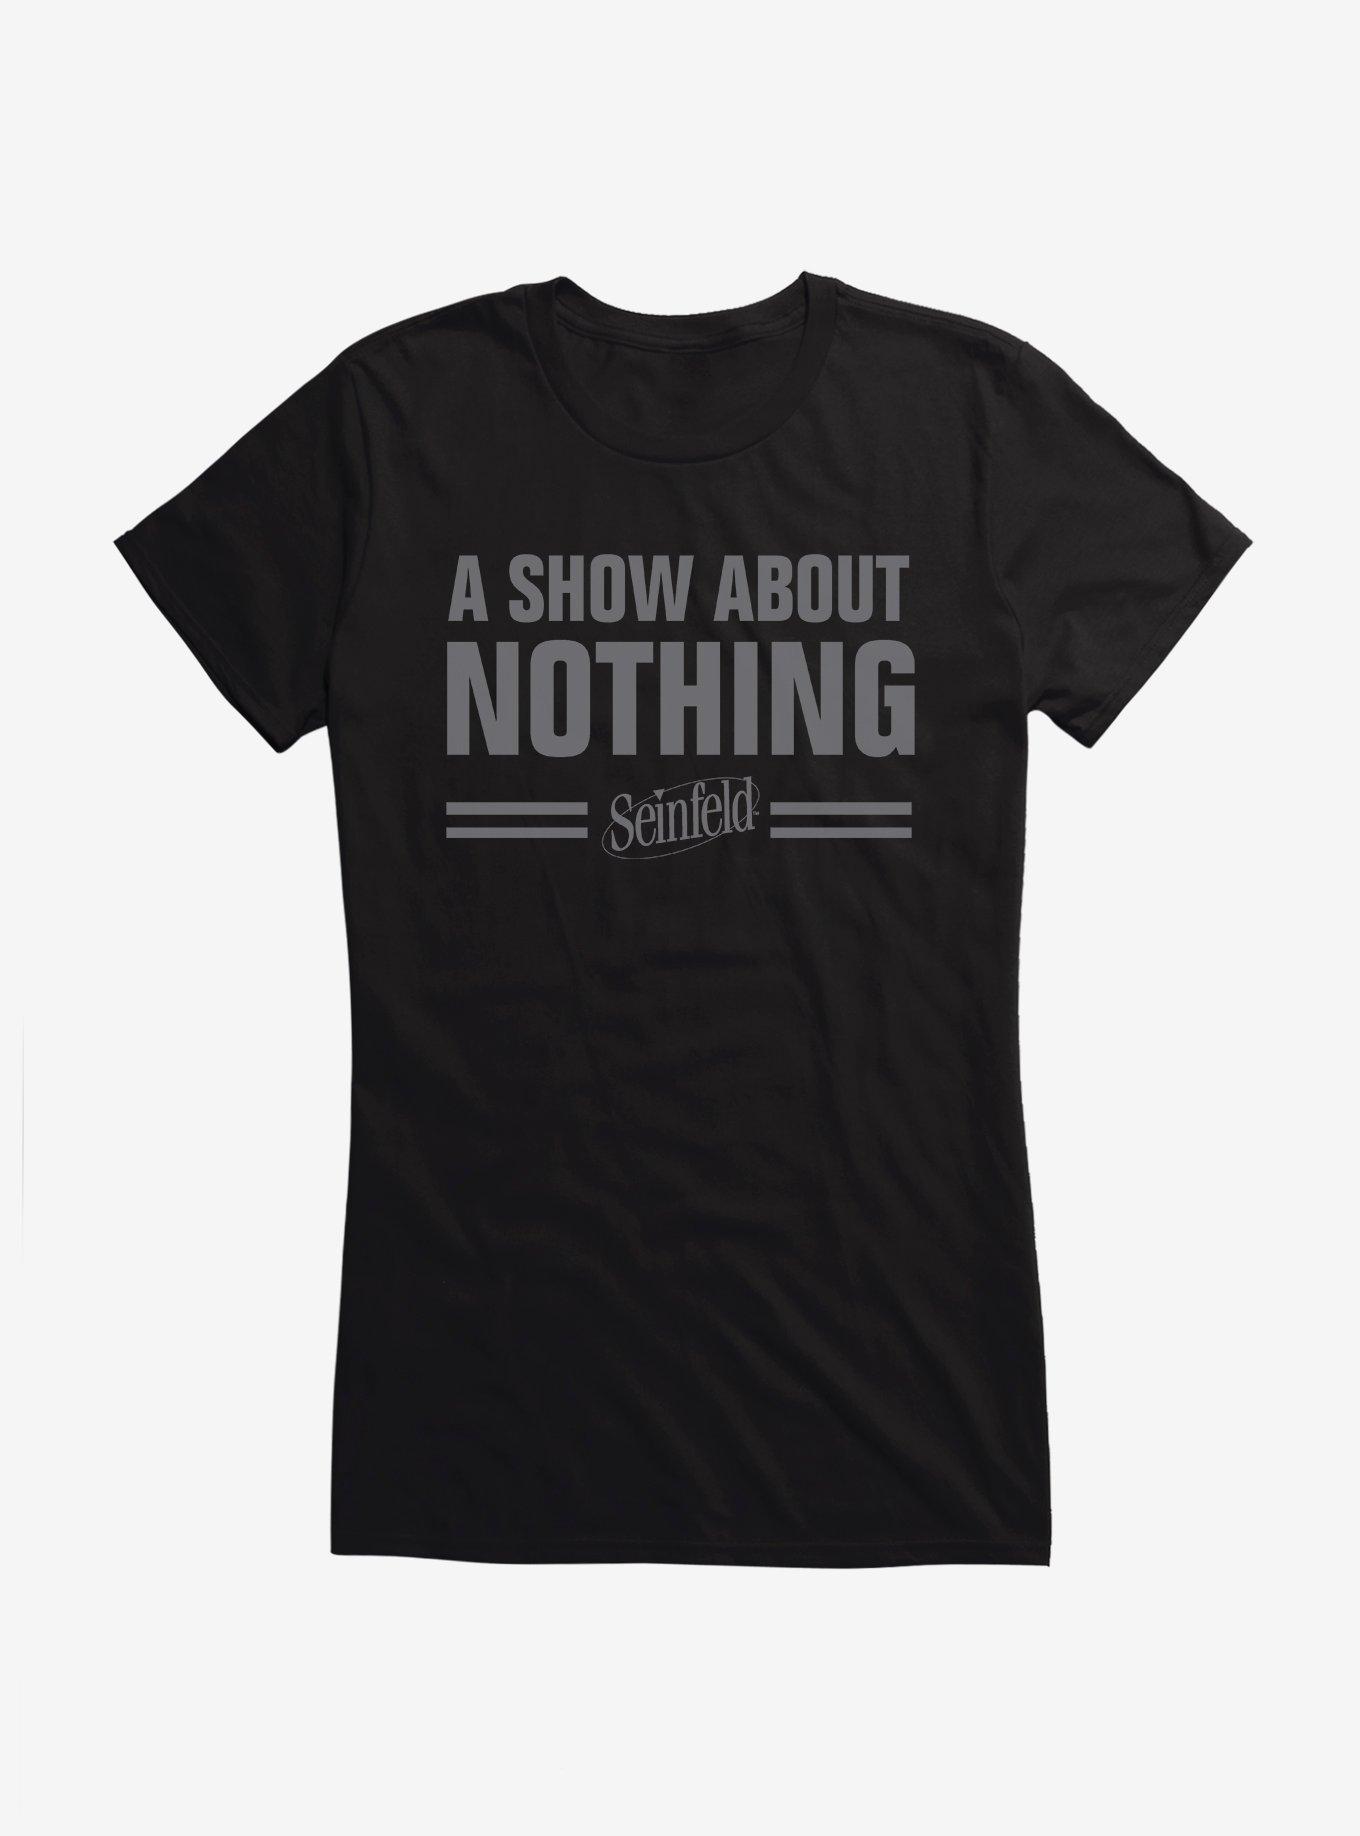 Seinfeld A Show About Nothing Girls T-Shirt